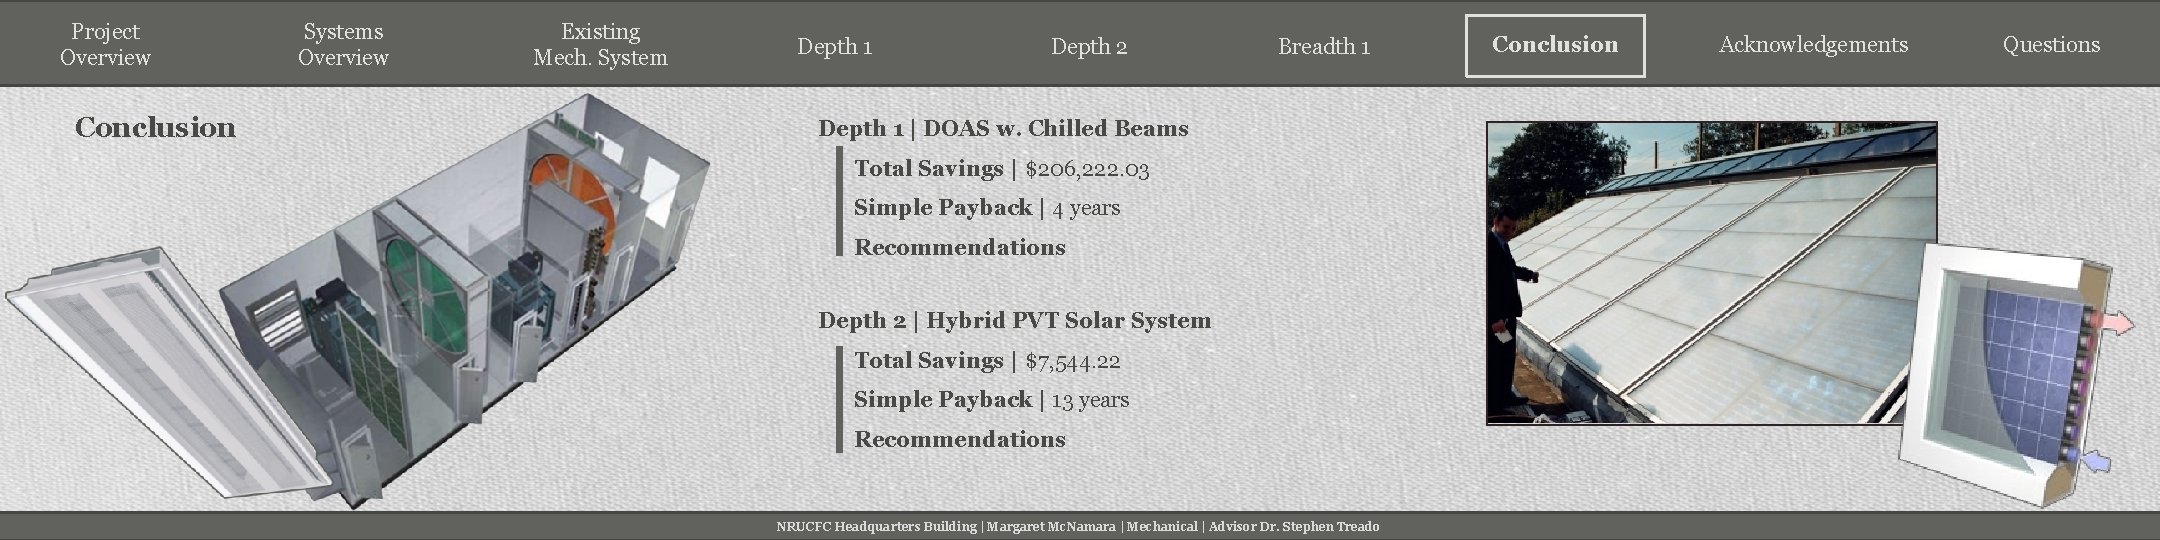 Project Overview Conclusion Systems Overview Existing Mech. System Depth 1 Depth 2 Breadth 1